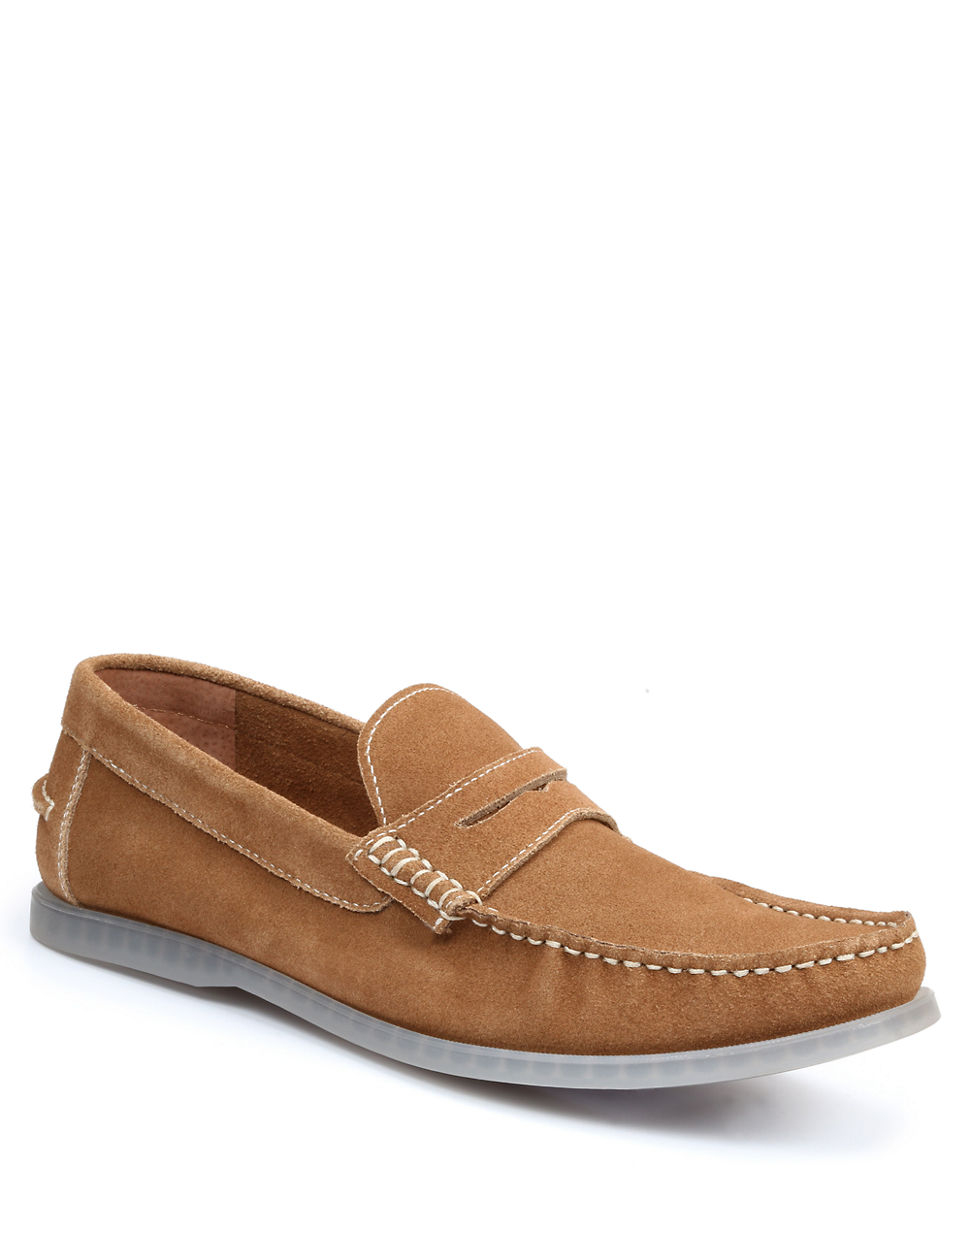 G.h. Bass & Co. Keane Suede Penny Loafers in Brown for Men (Taupe) | Lyst